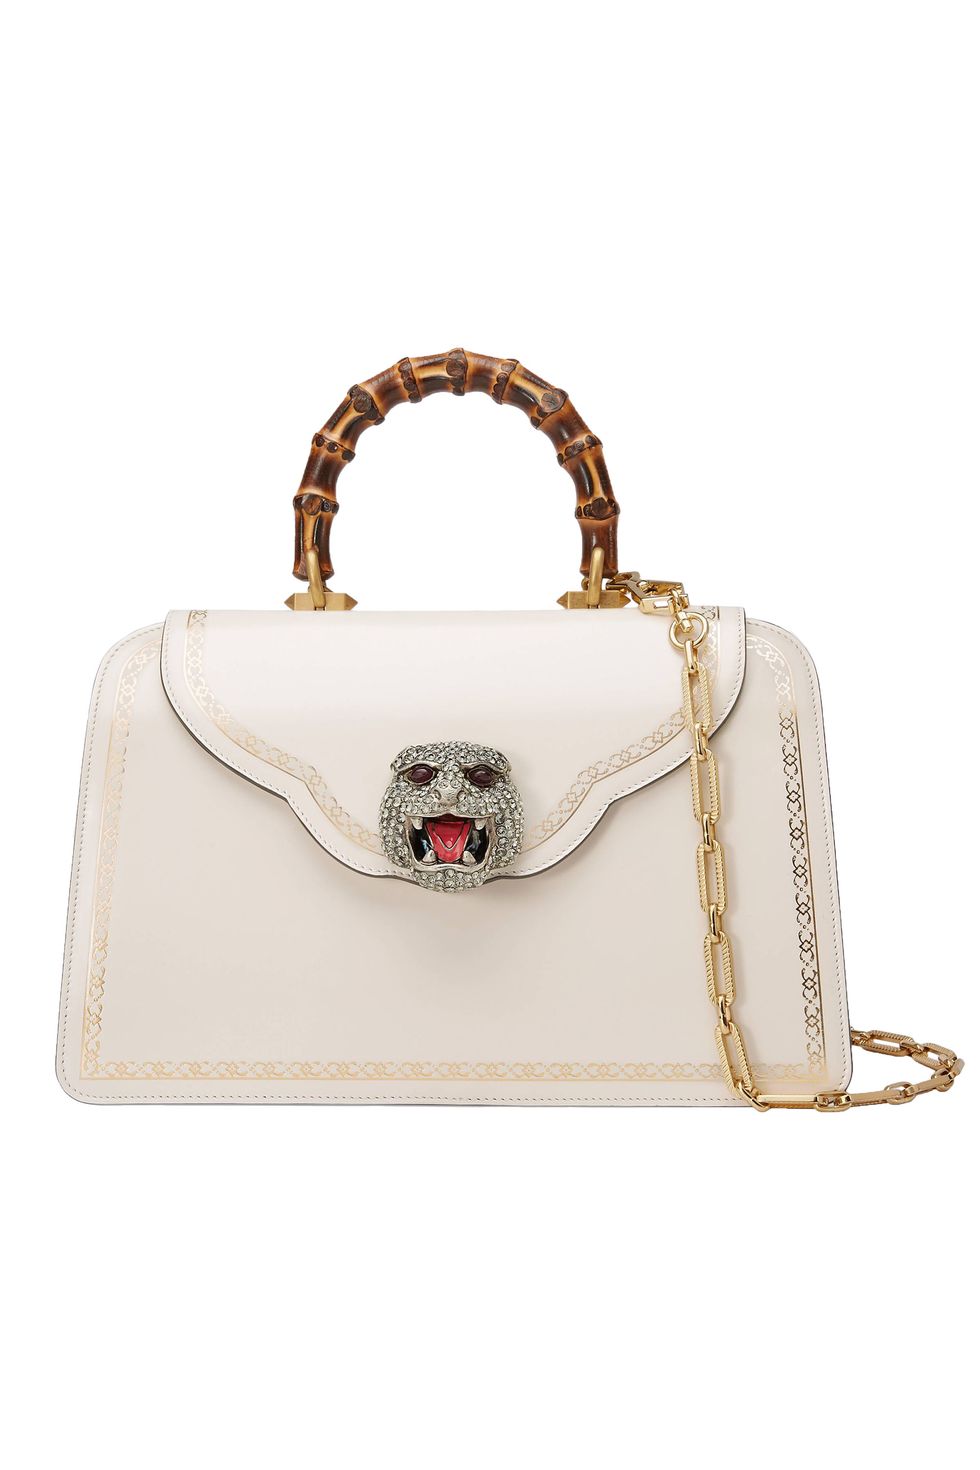 Handbag, Bag, White, Fashion accessory, Shoulder bag, Beige, Leather, Luggage and bags, Chain, Fawn, 